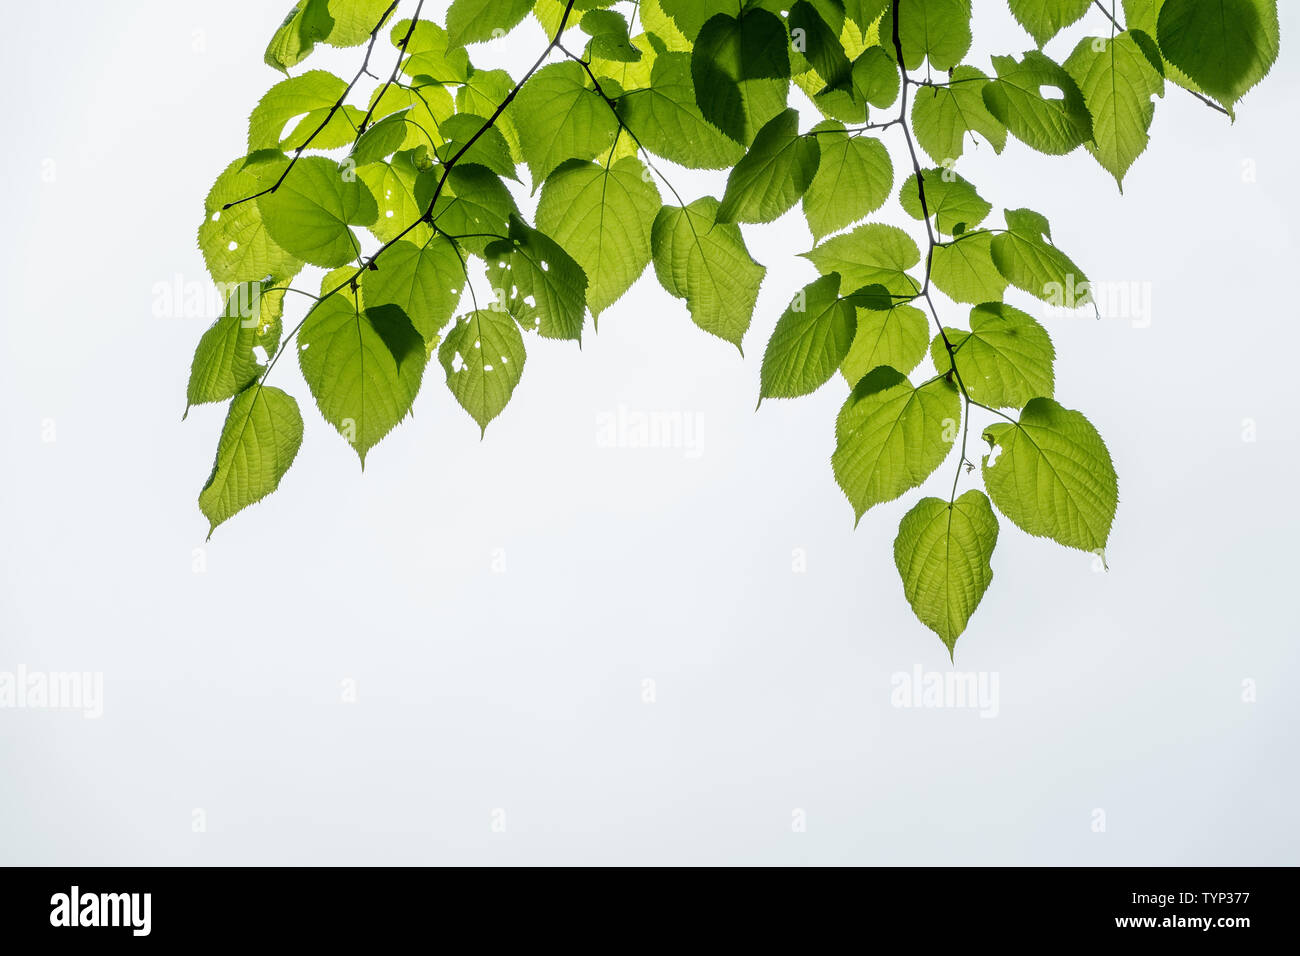 Green leaves of linden Tilia dasystyla on a white background. Tilia dasystyla is a deciduous lime tree species Stock Photo